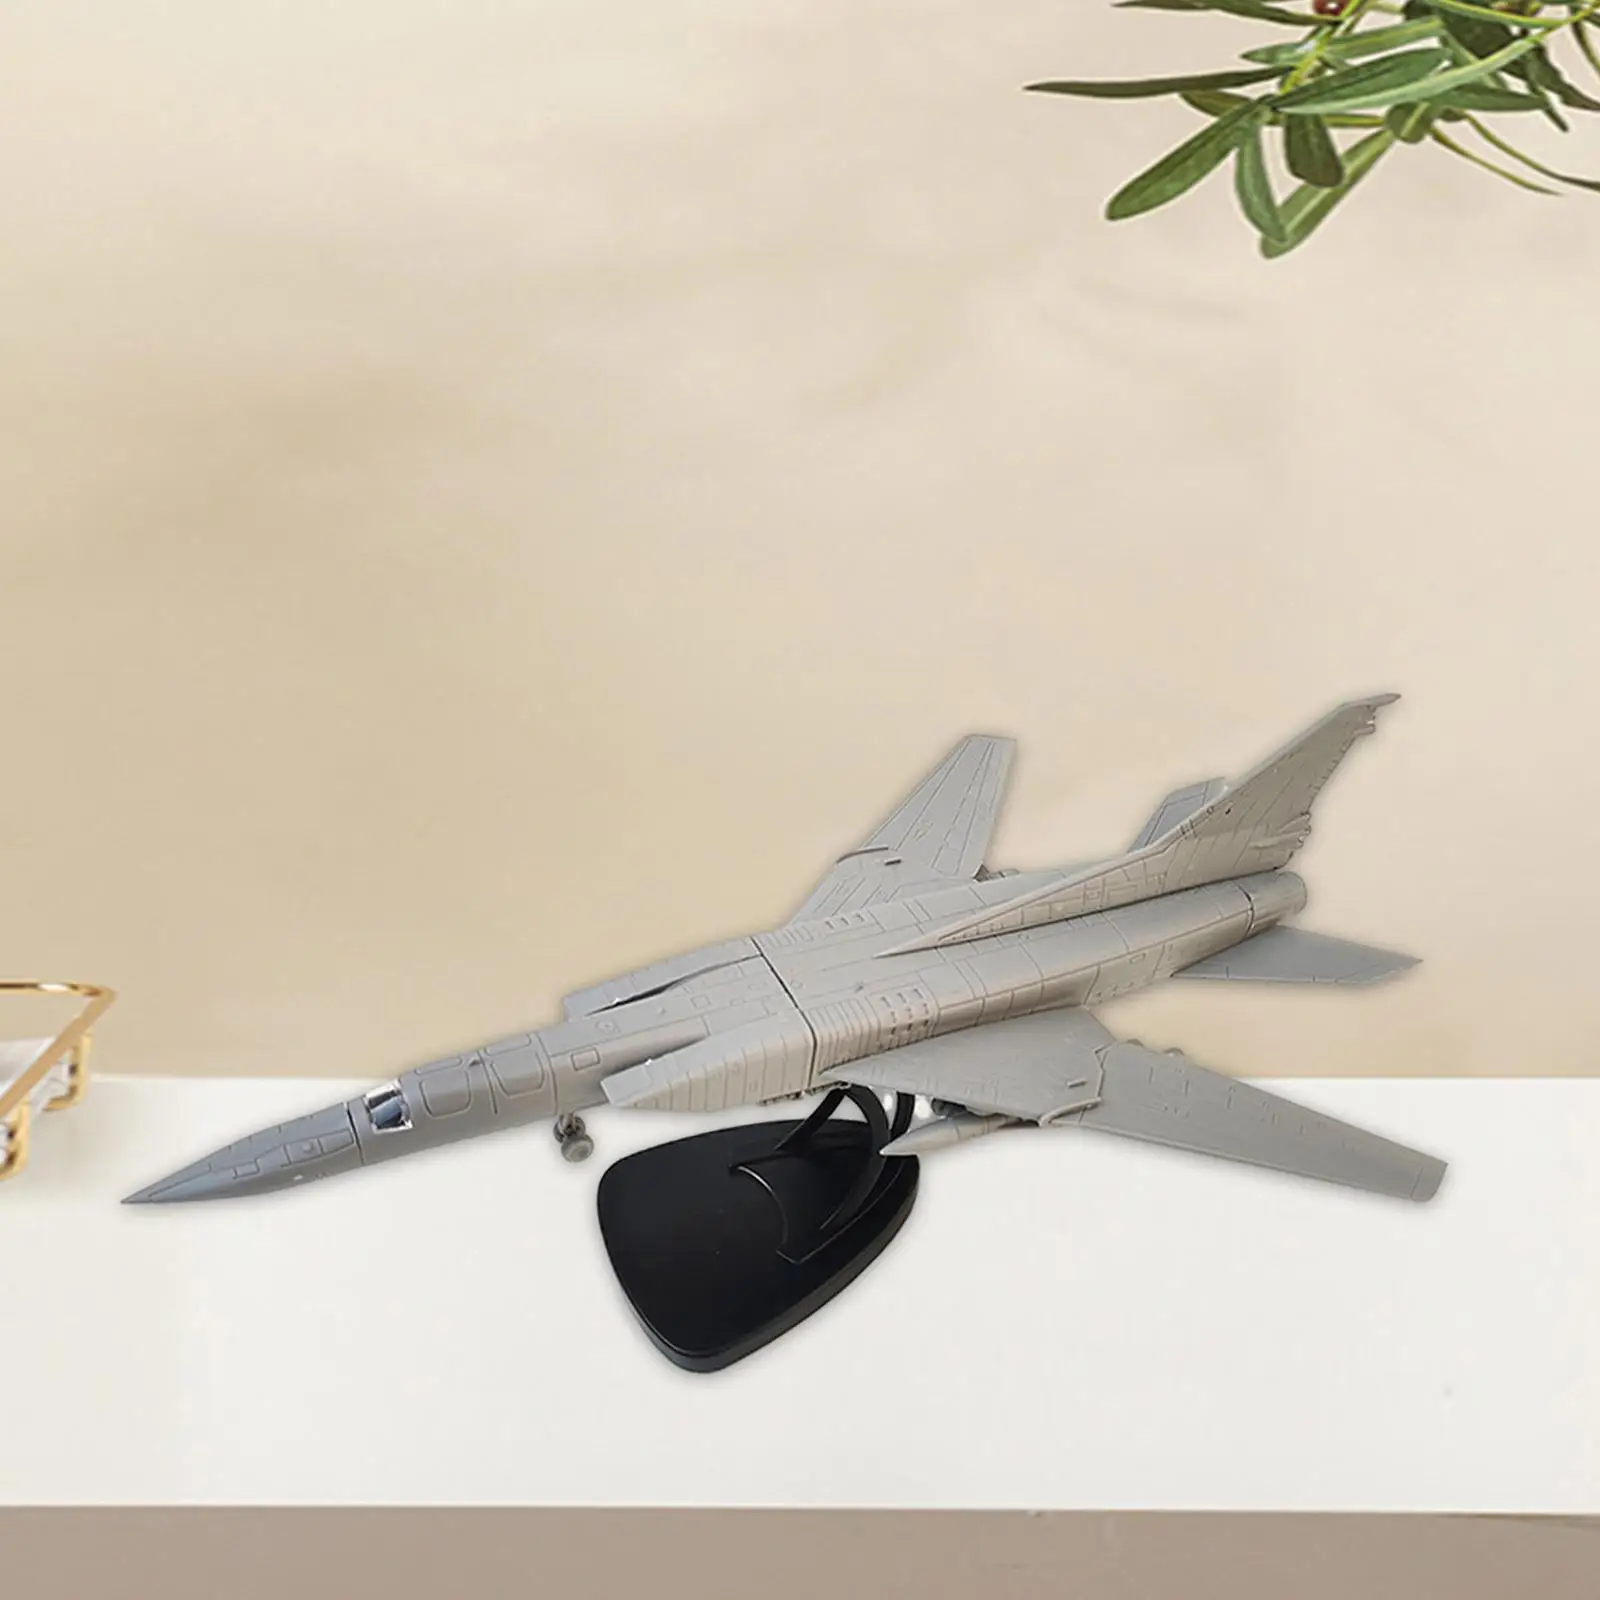 

Simulation Miniature Toys with Display Stand Party Favor 1:144 Bomber Airplane Model for Bedroom Study Living Room Library Teens